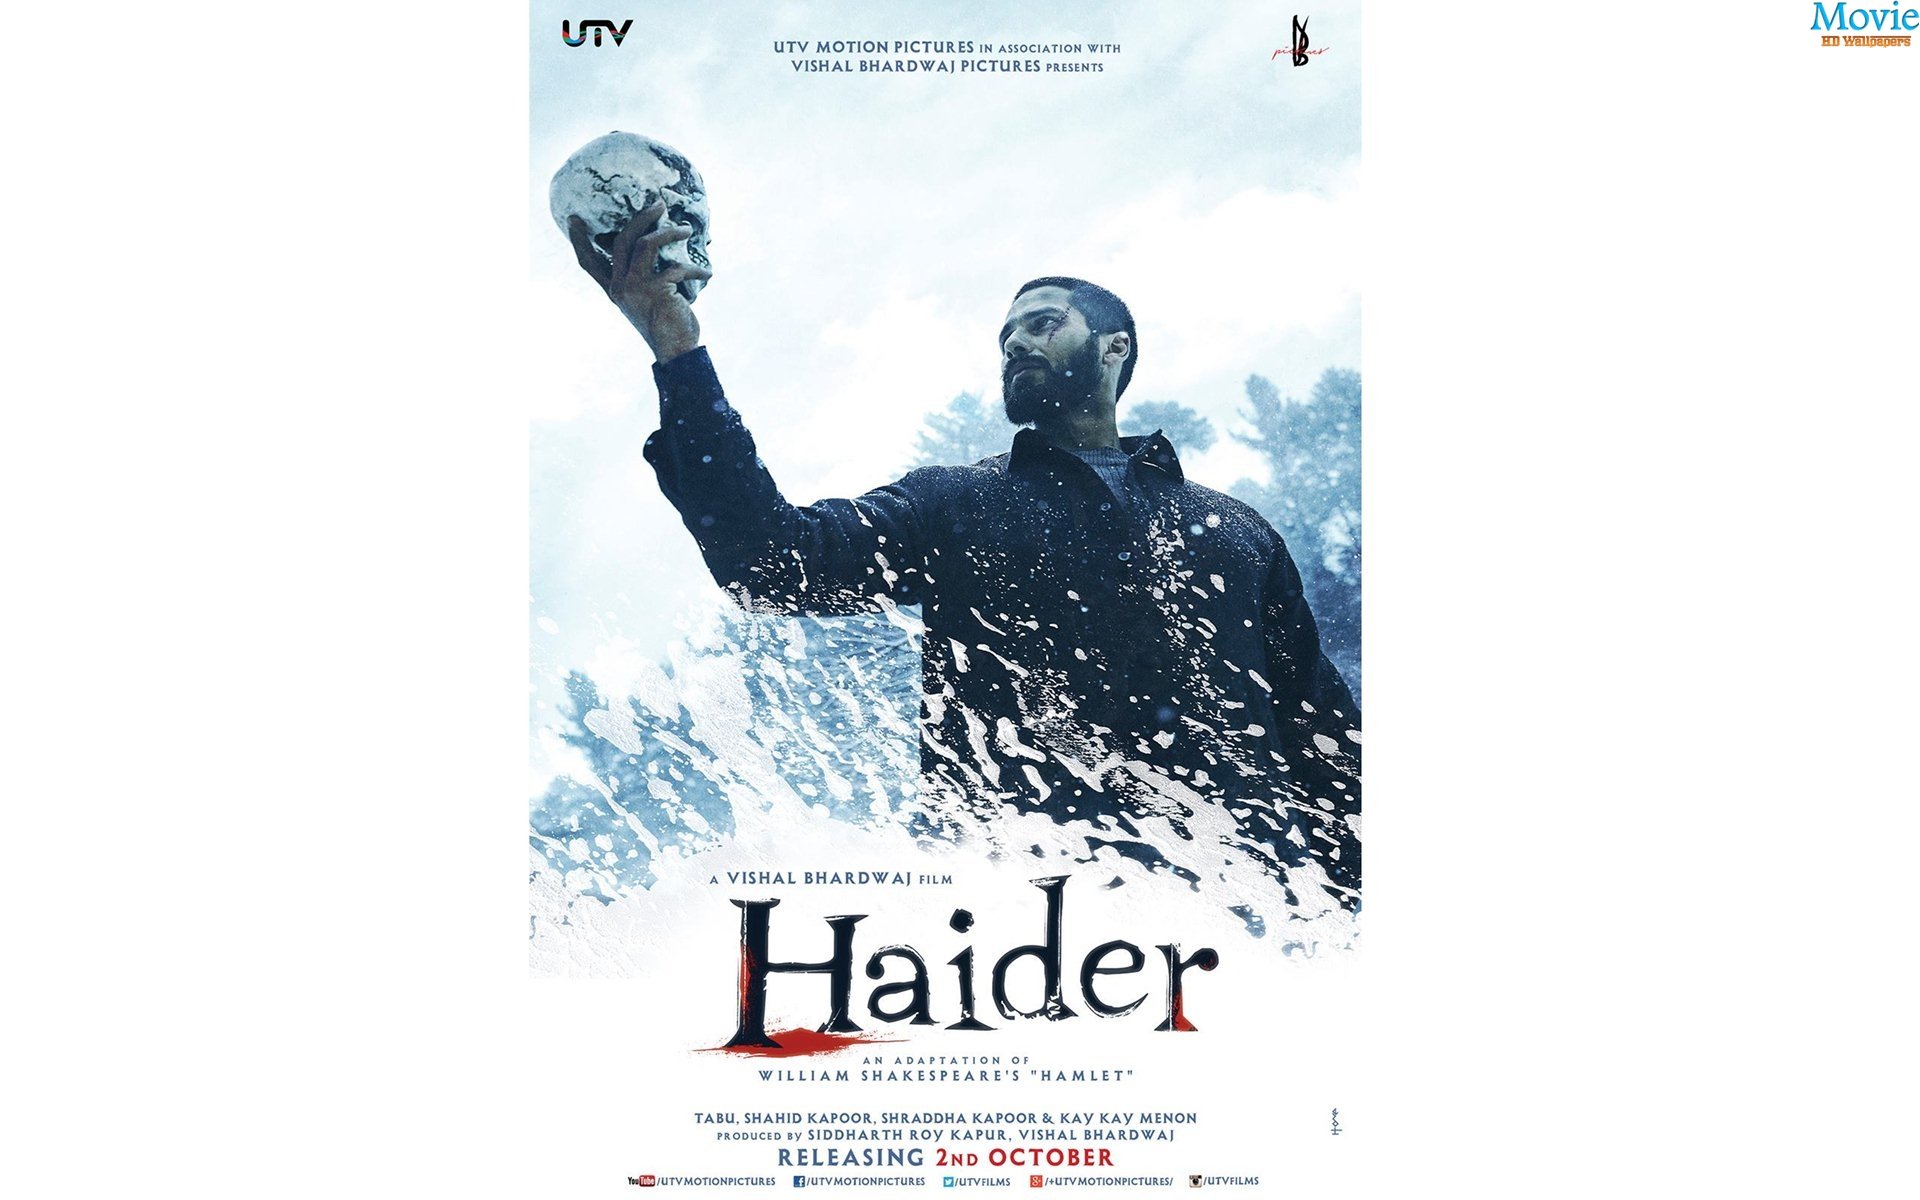 Haider Movie Poster Wallpapers